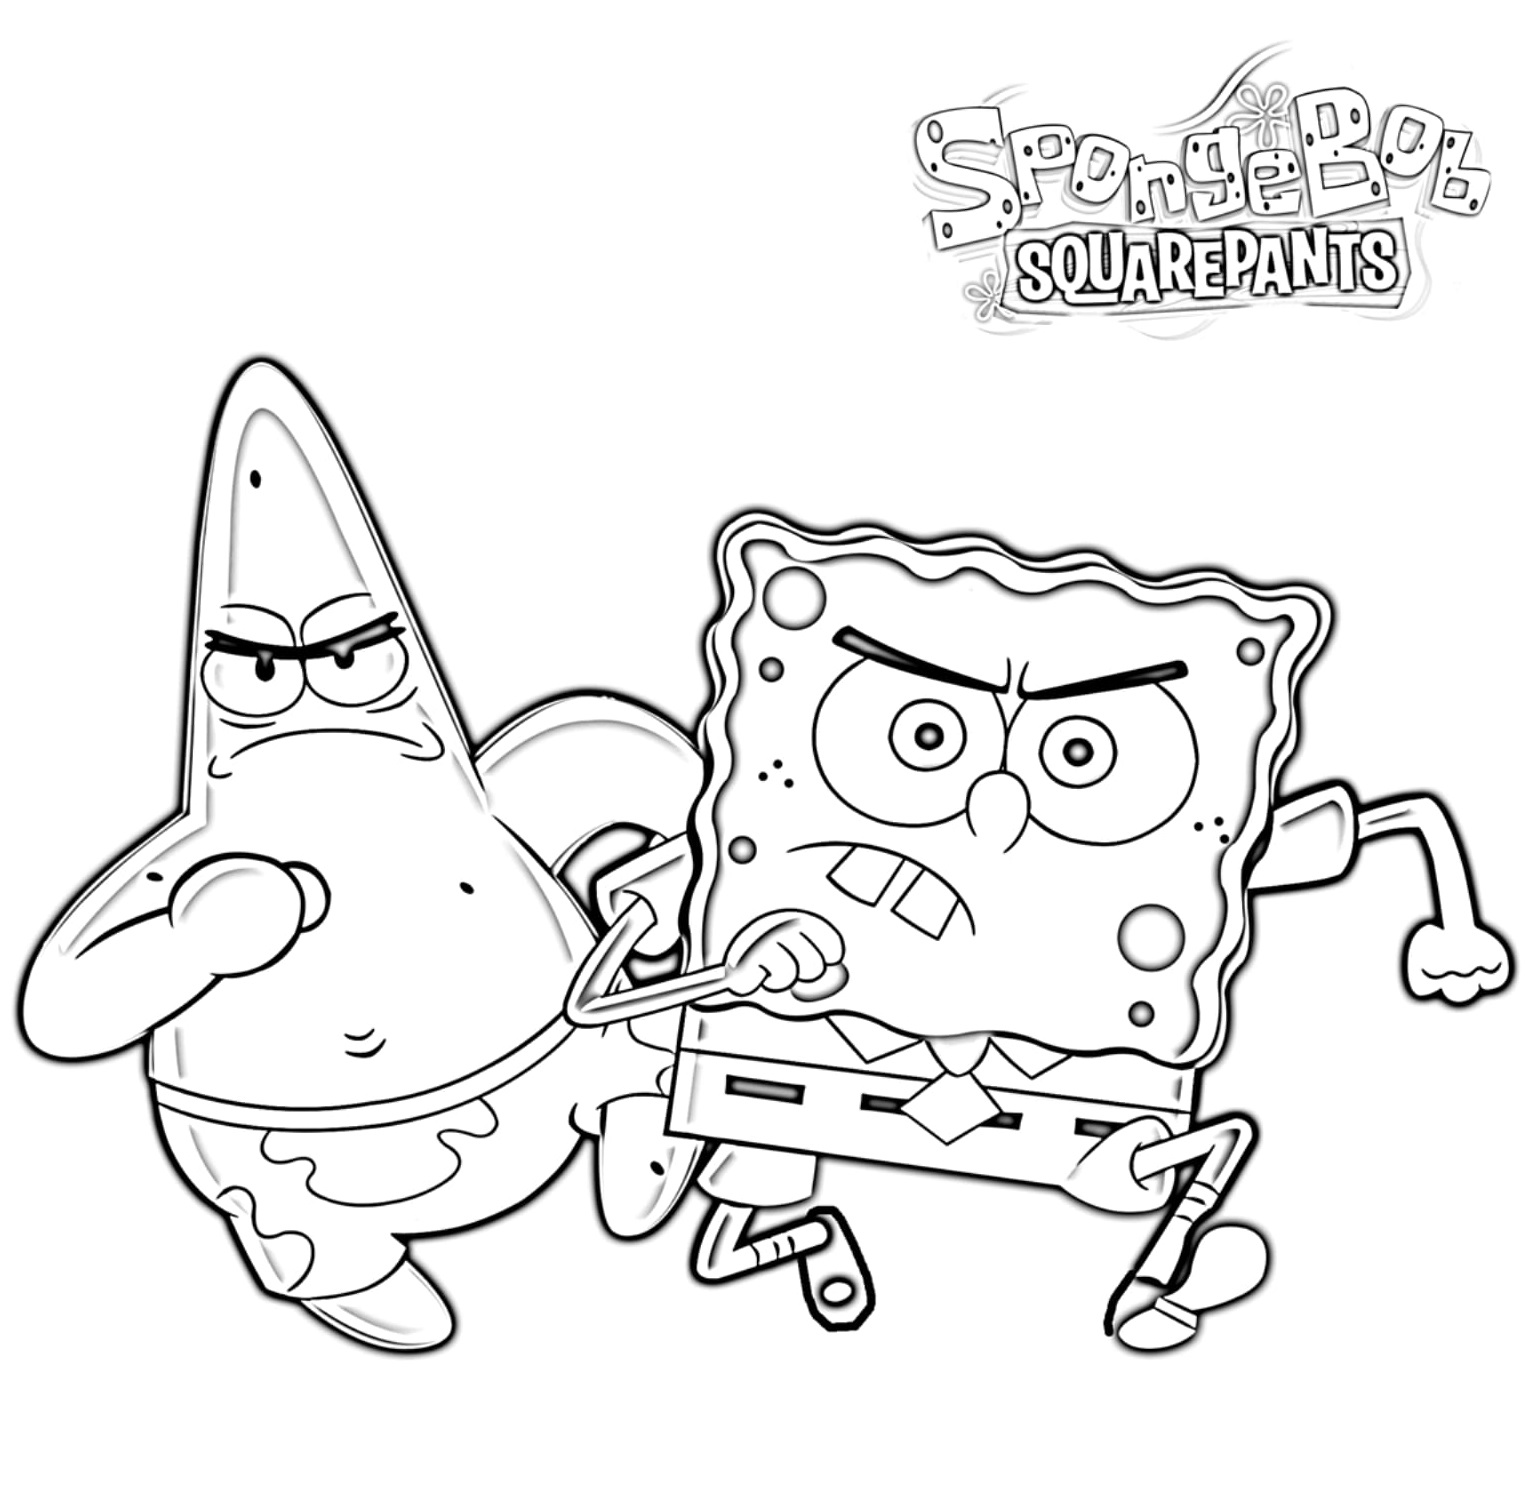 Spongebob And Patrick Angry Coloring Page